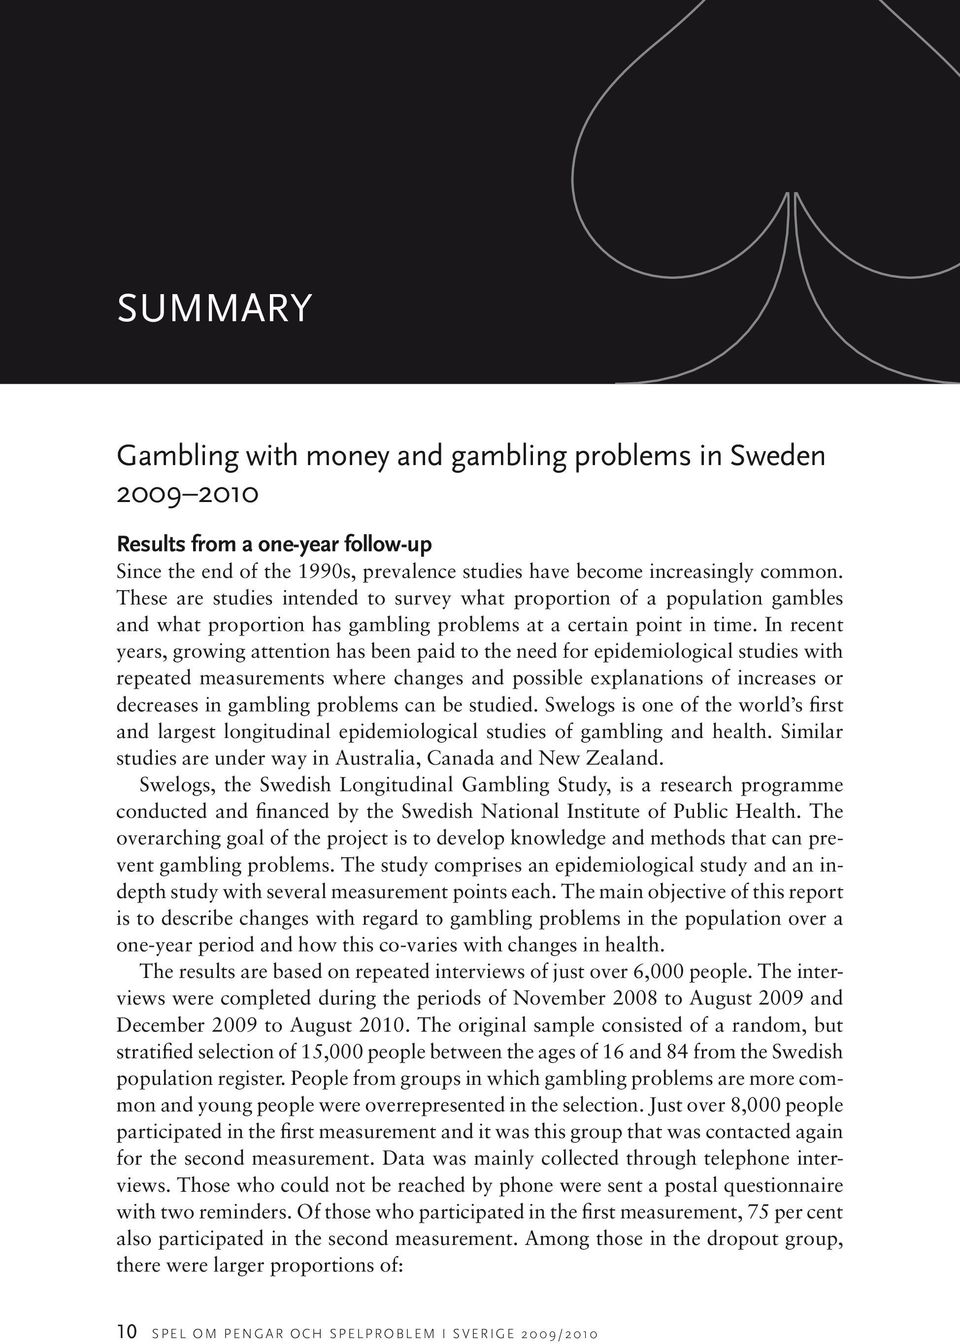 In recent years, growing attention has been paid to the need for epidemiological studies with repeated measurements where changes and possible explanations of increases or decreases in gambling